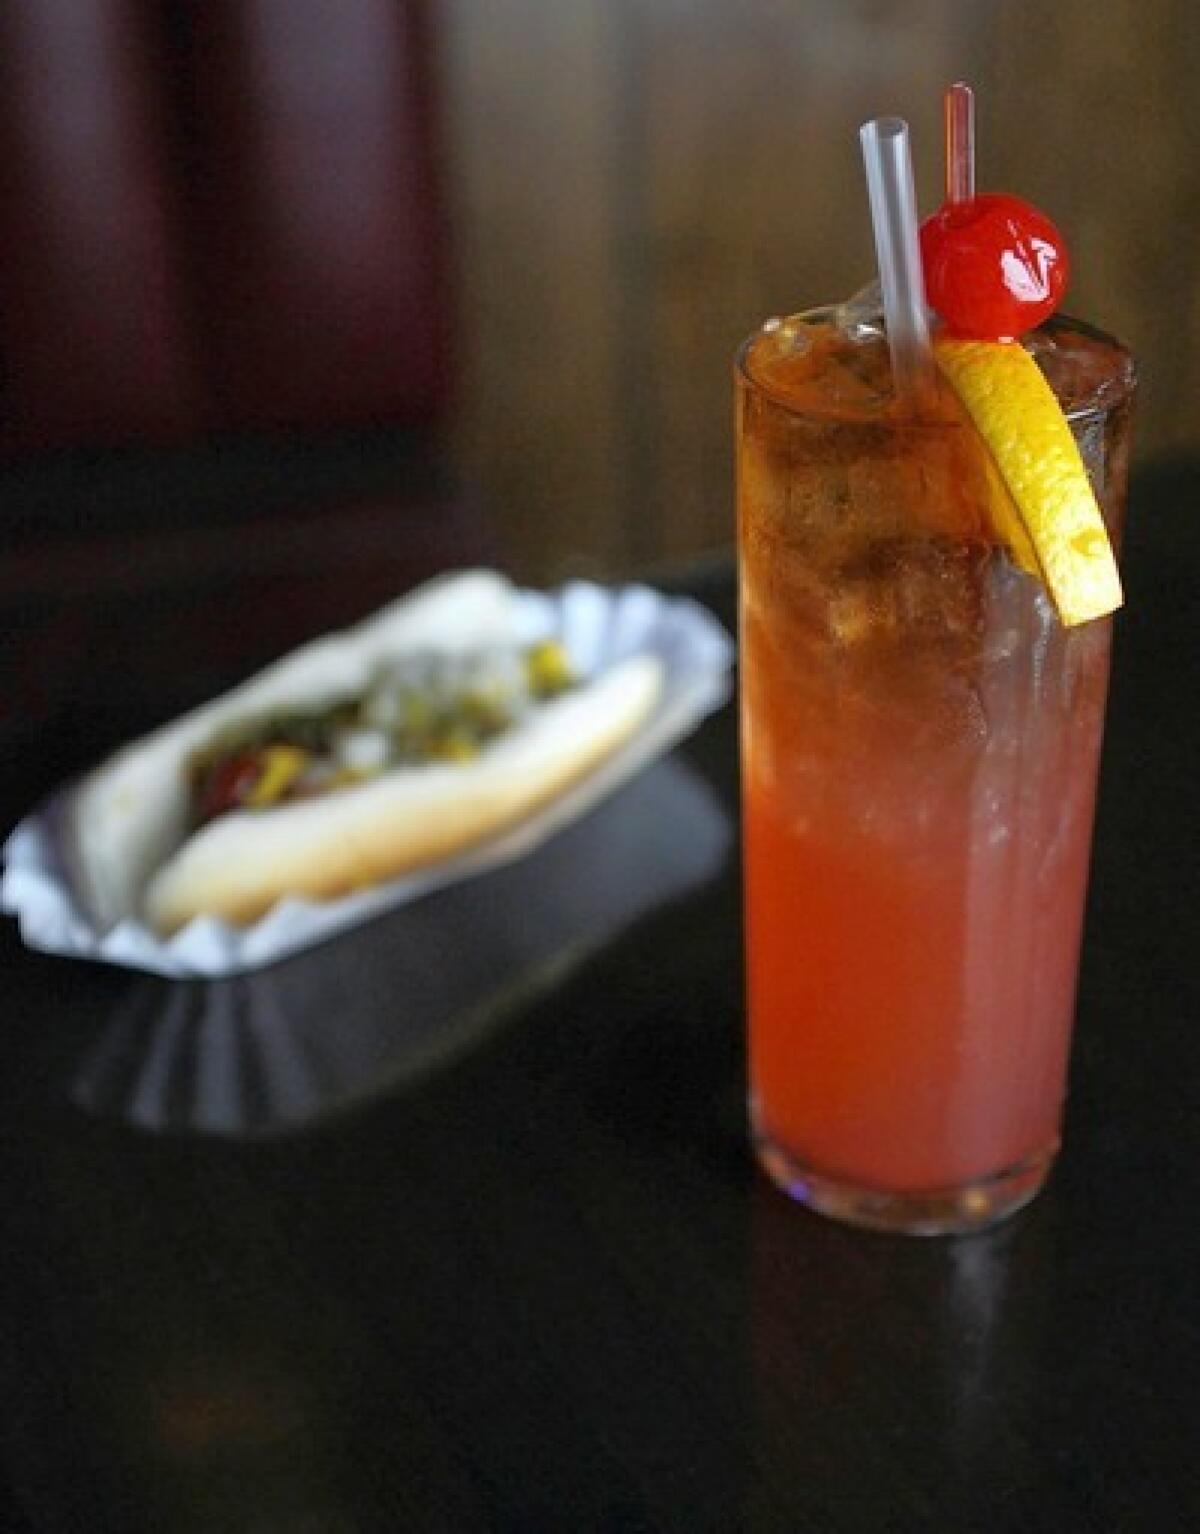 Customers can enjoy happy hour drink specials at Dave's in Glendale. Complimentary hot dogs are offered from 4 p.m. to 7 p.m. Patrons can have $3 well drinks and $1 off on domestic beers. This cocktail, as pictured, is a mix of rum, pineapple juice and cherry grenadine.